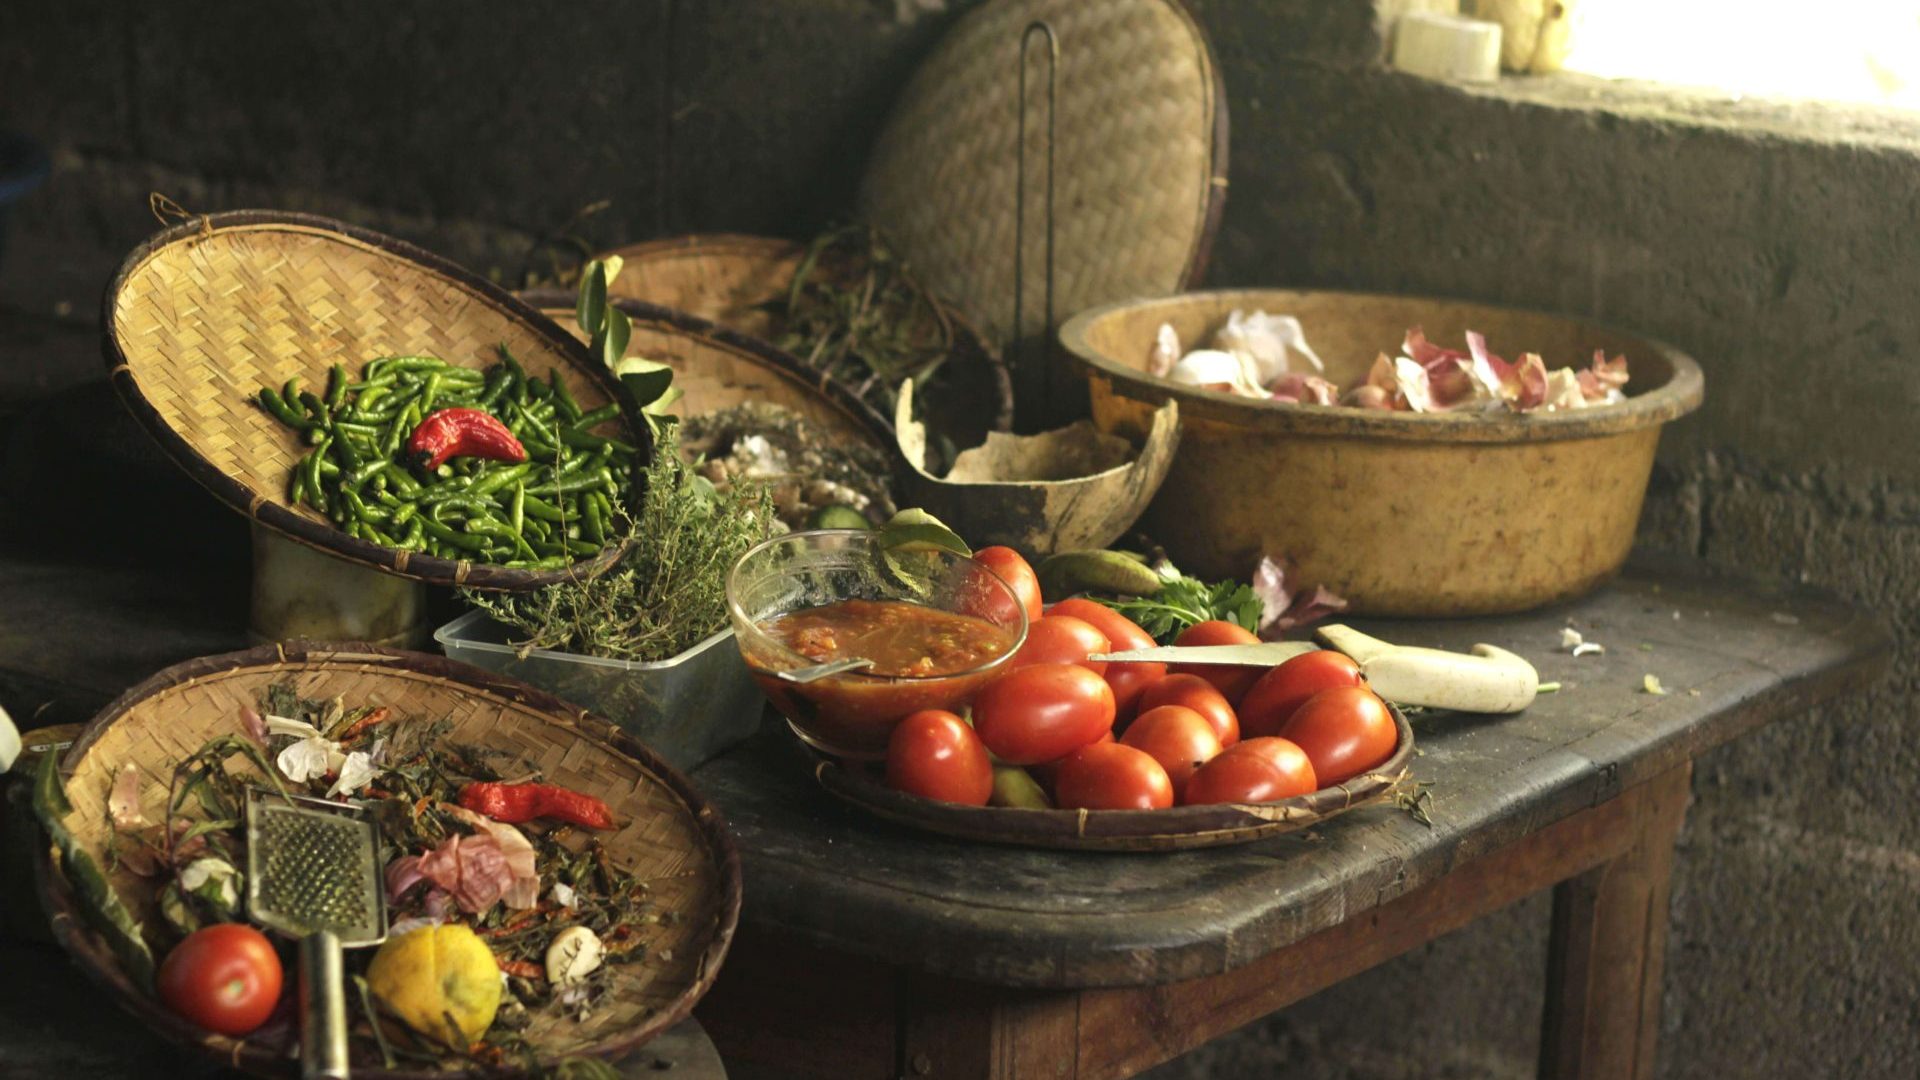 Vegetables and spices in a Creole cuisine on Reunion Island